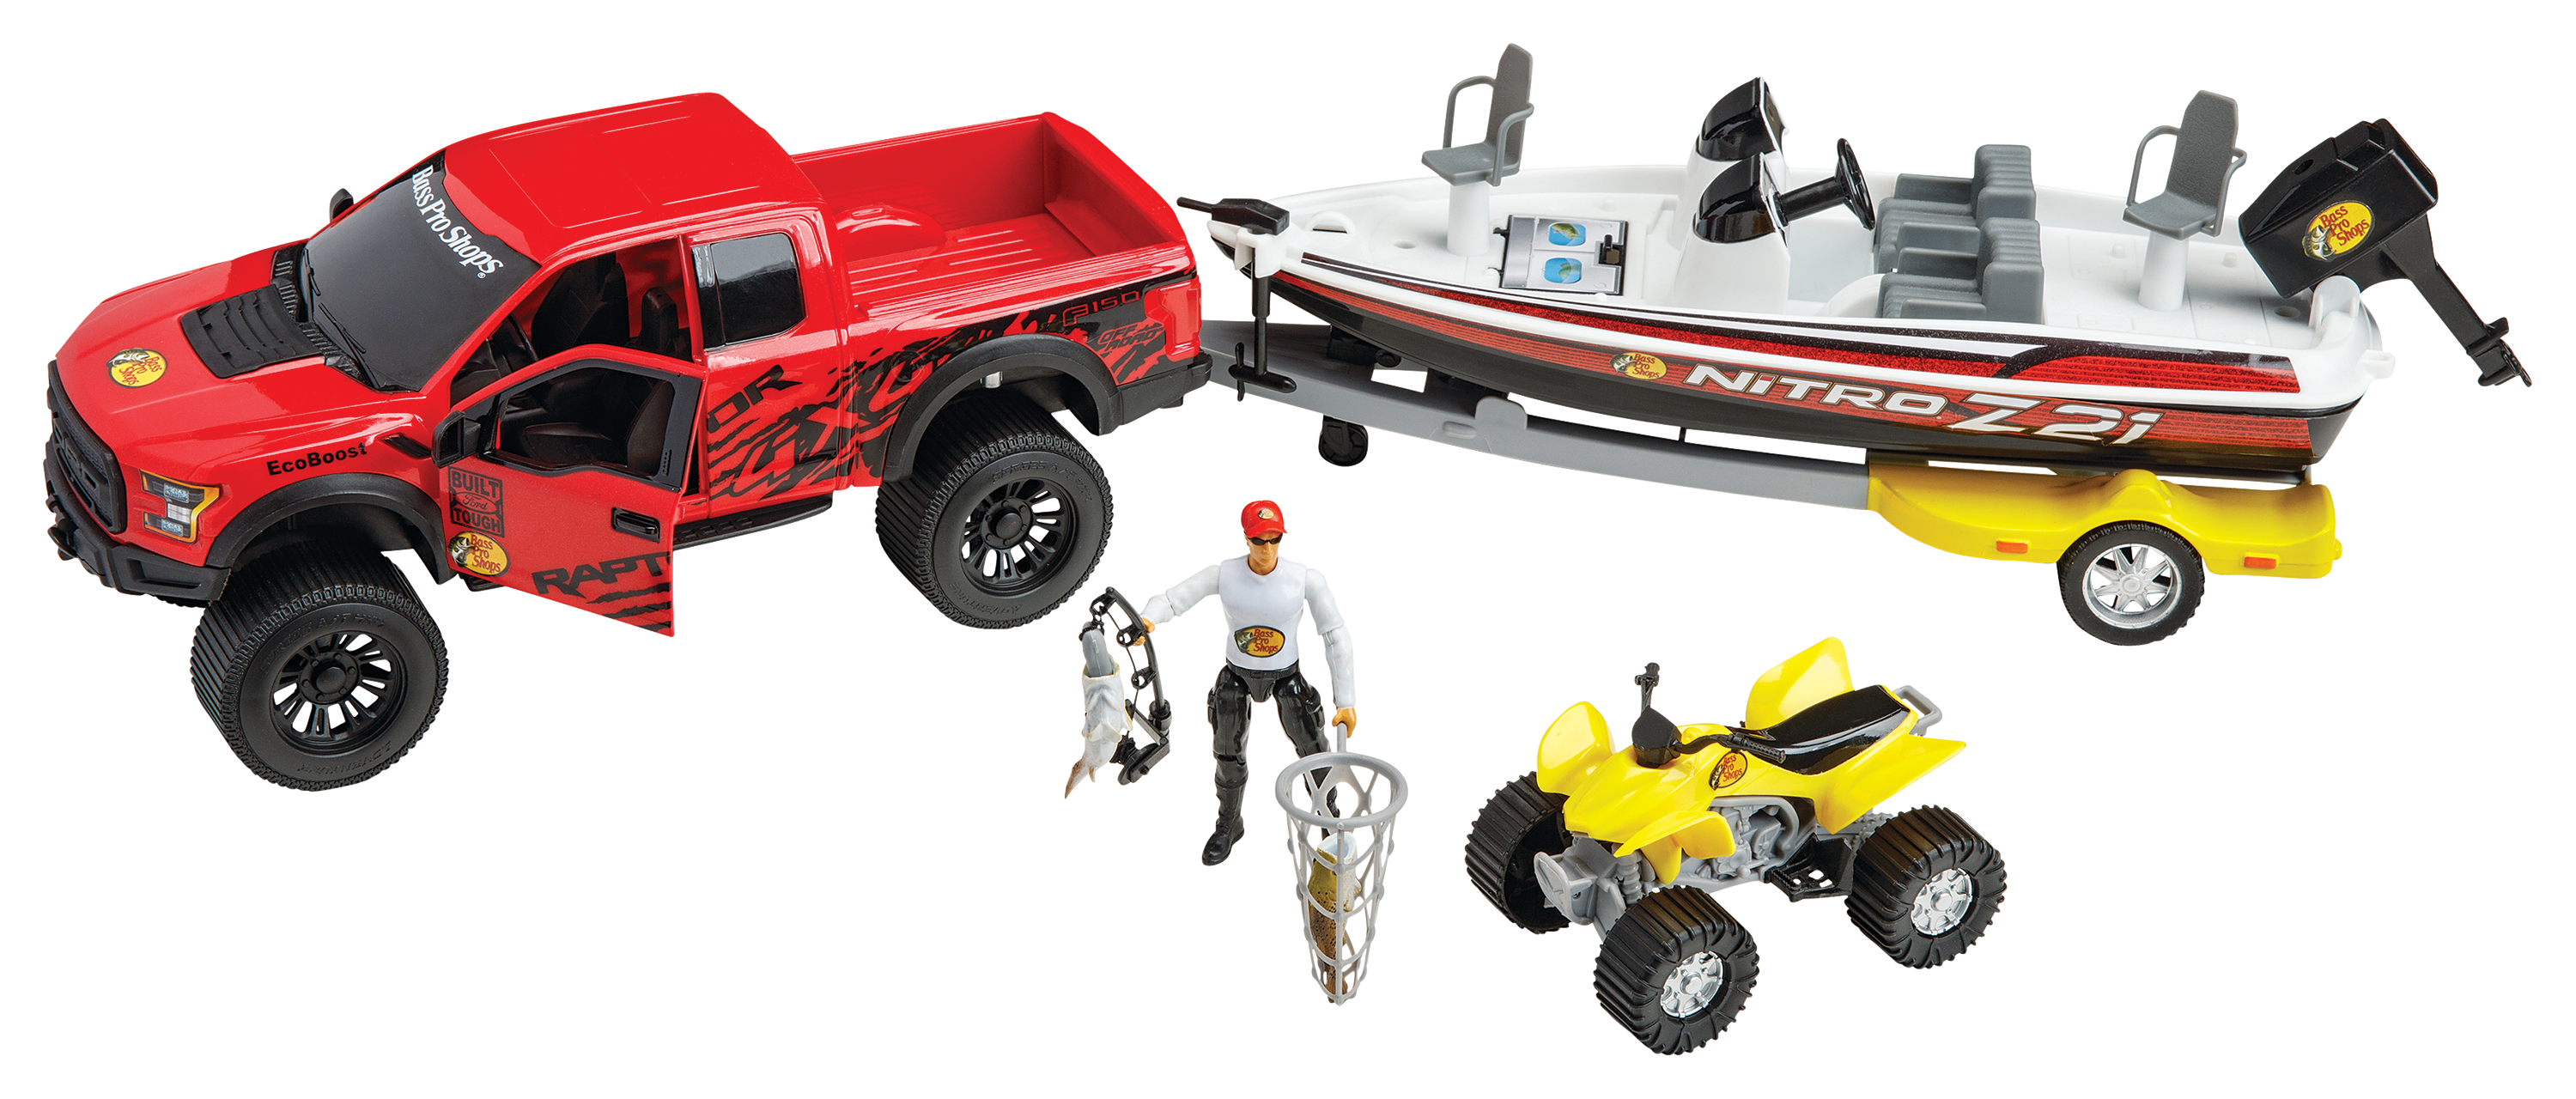 Bass Pro Shops Imagination Adventure Bass Boat and Ford Raptor